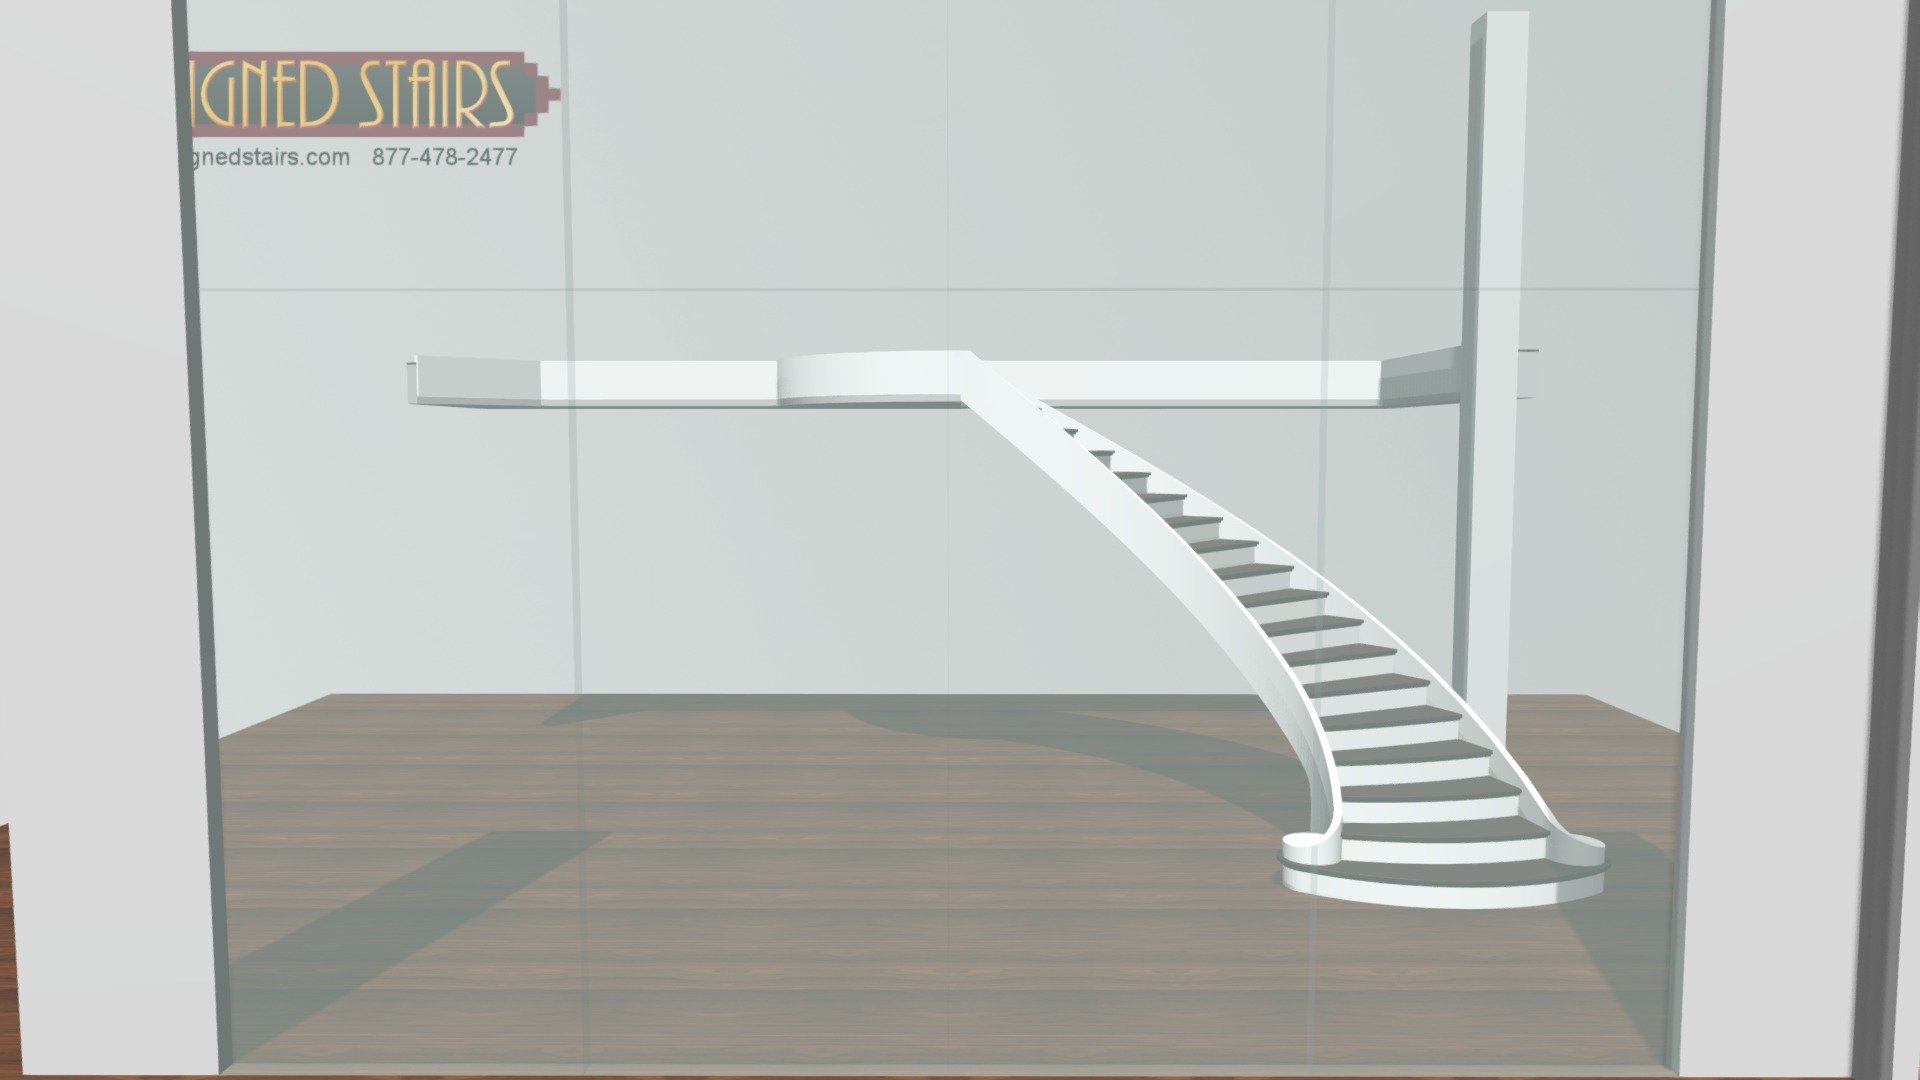 Curved stair with descending drum at start (no handrail) - 48005 back stair 3-2-20 - 3D model by designedstairs 3d model